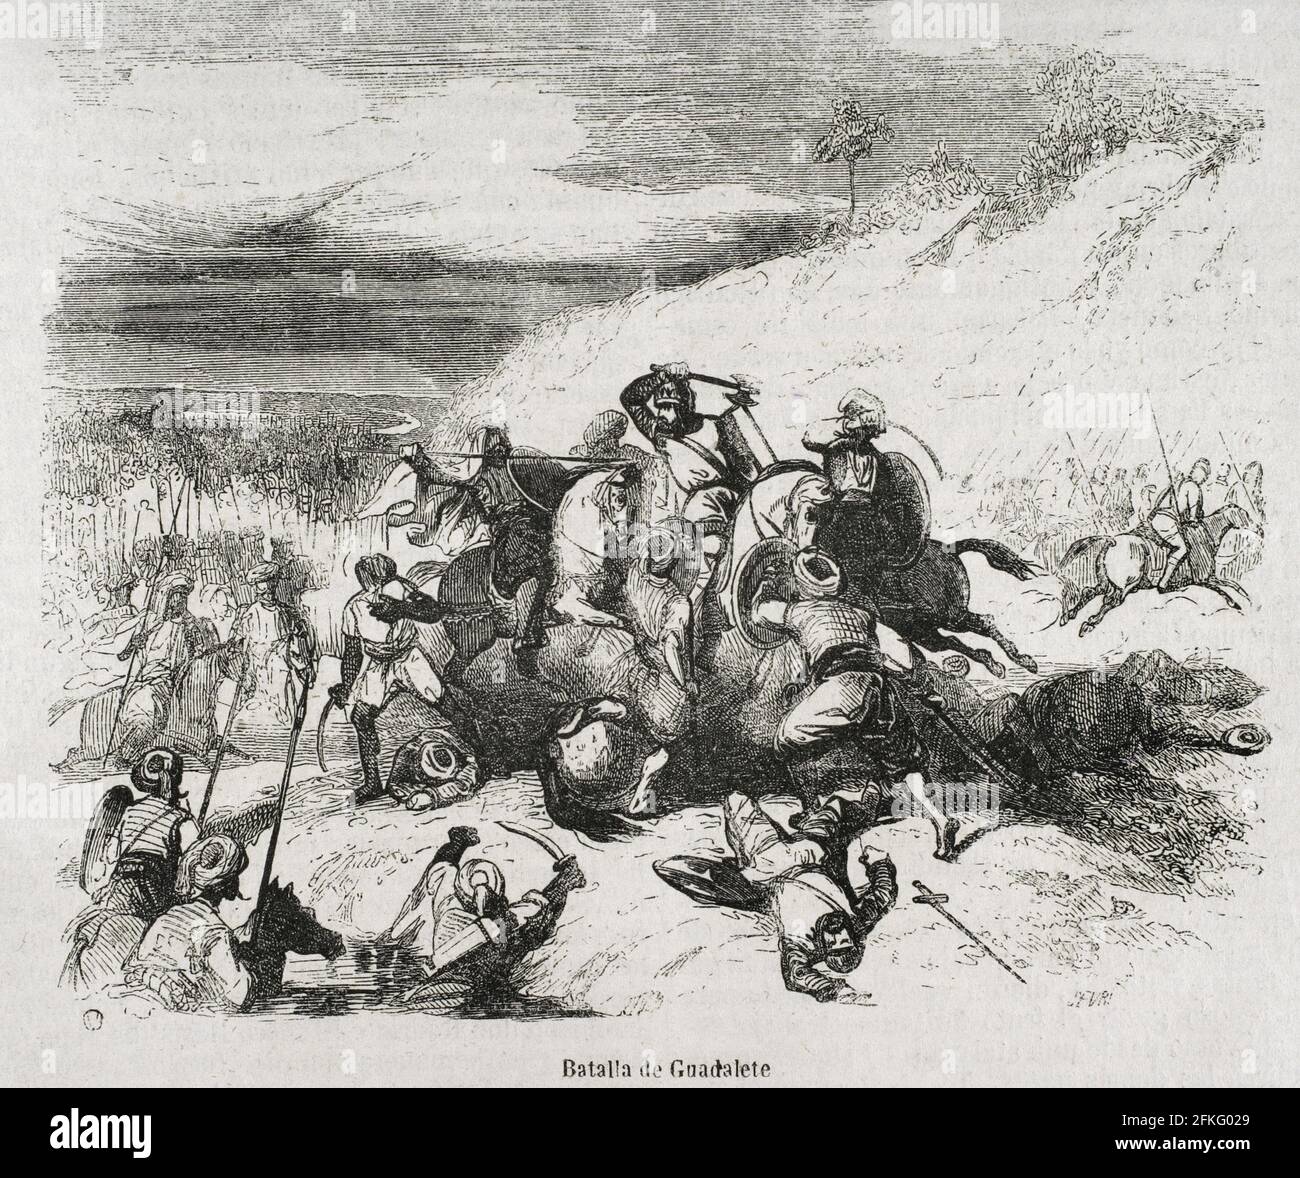 Battle of Guadalete (July 19-26, 711). The Visigoth king Roderick was defeated by the Muslim Umayyad Caliphate led by Tariq ibn Ziyad. Engraving. Historia General de España by Father Mariana. Madrid, 1852. Stock Photo